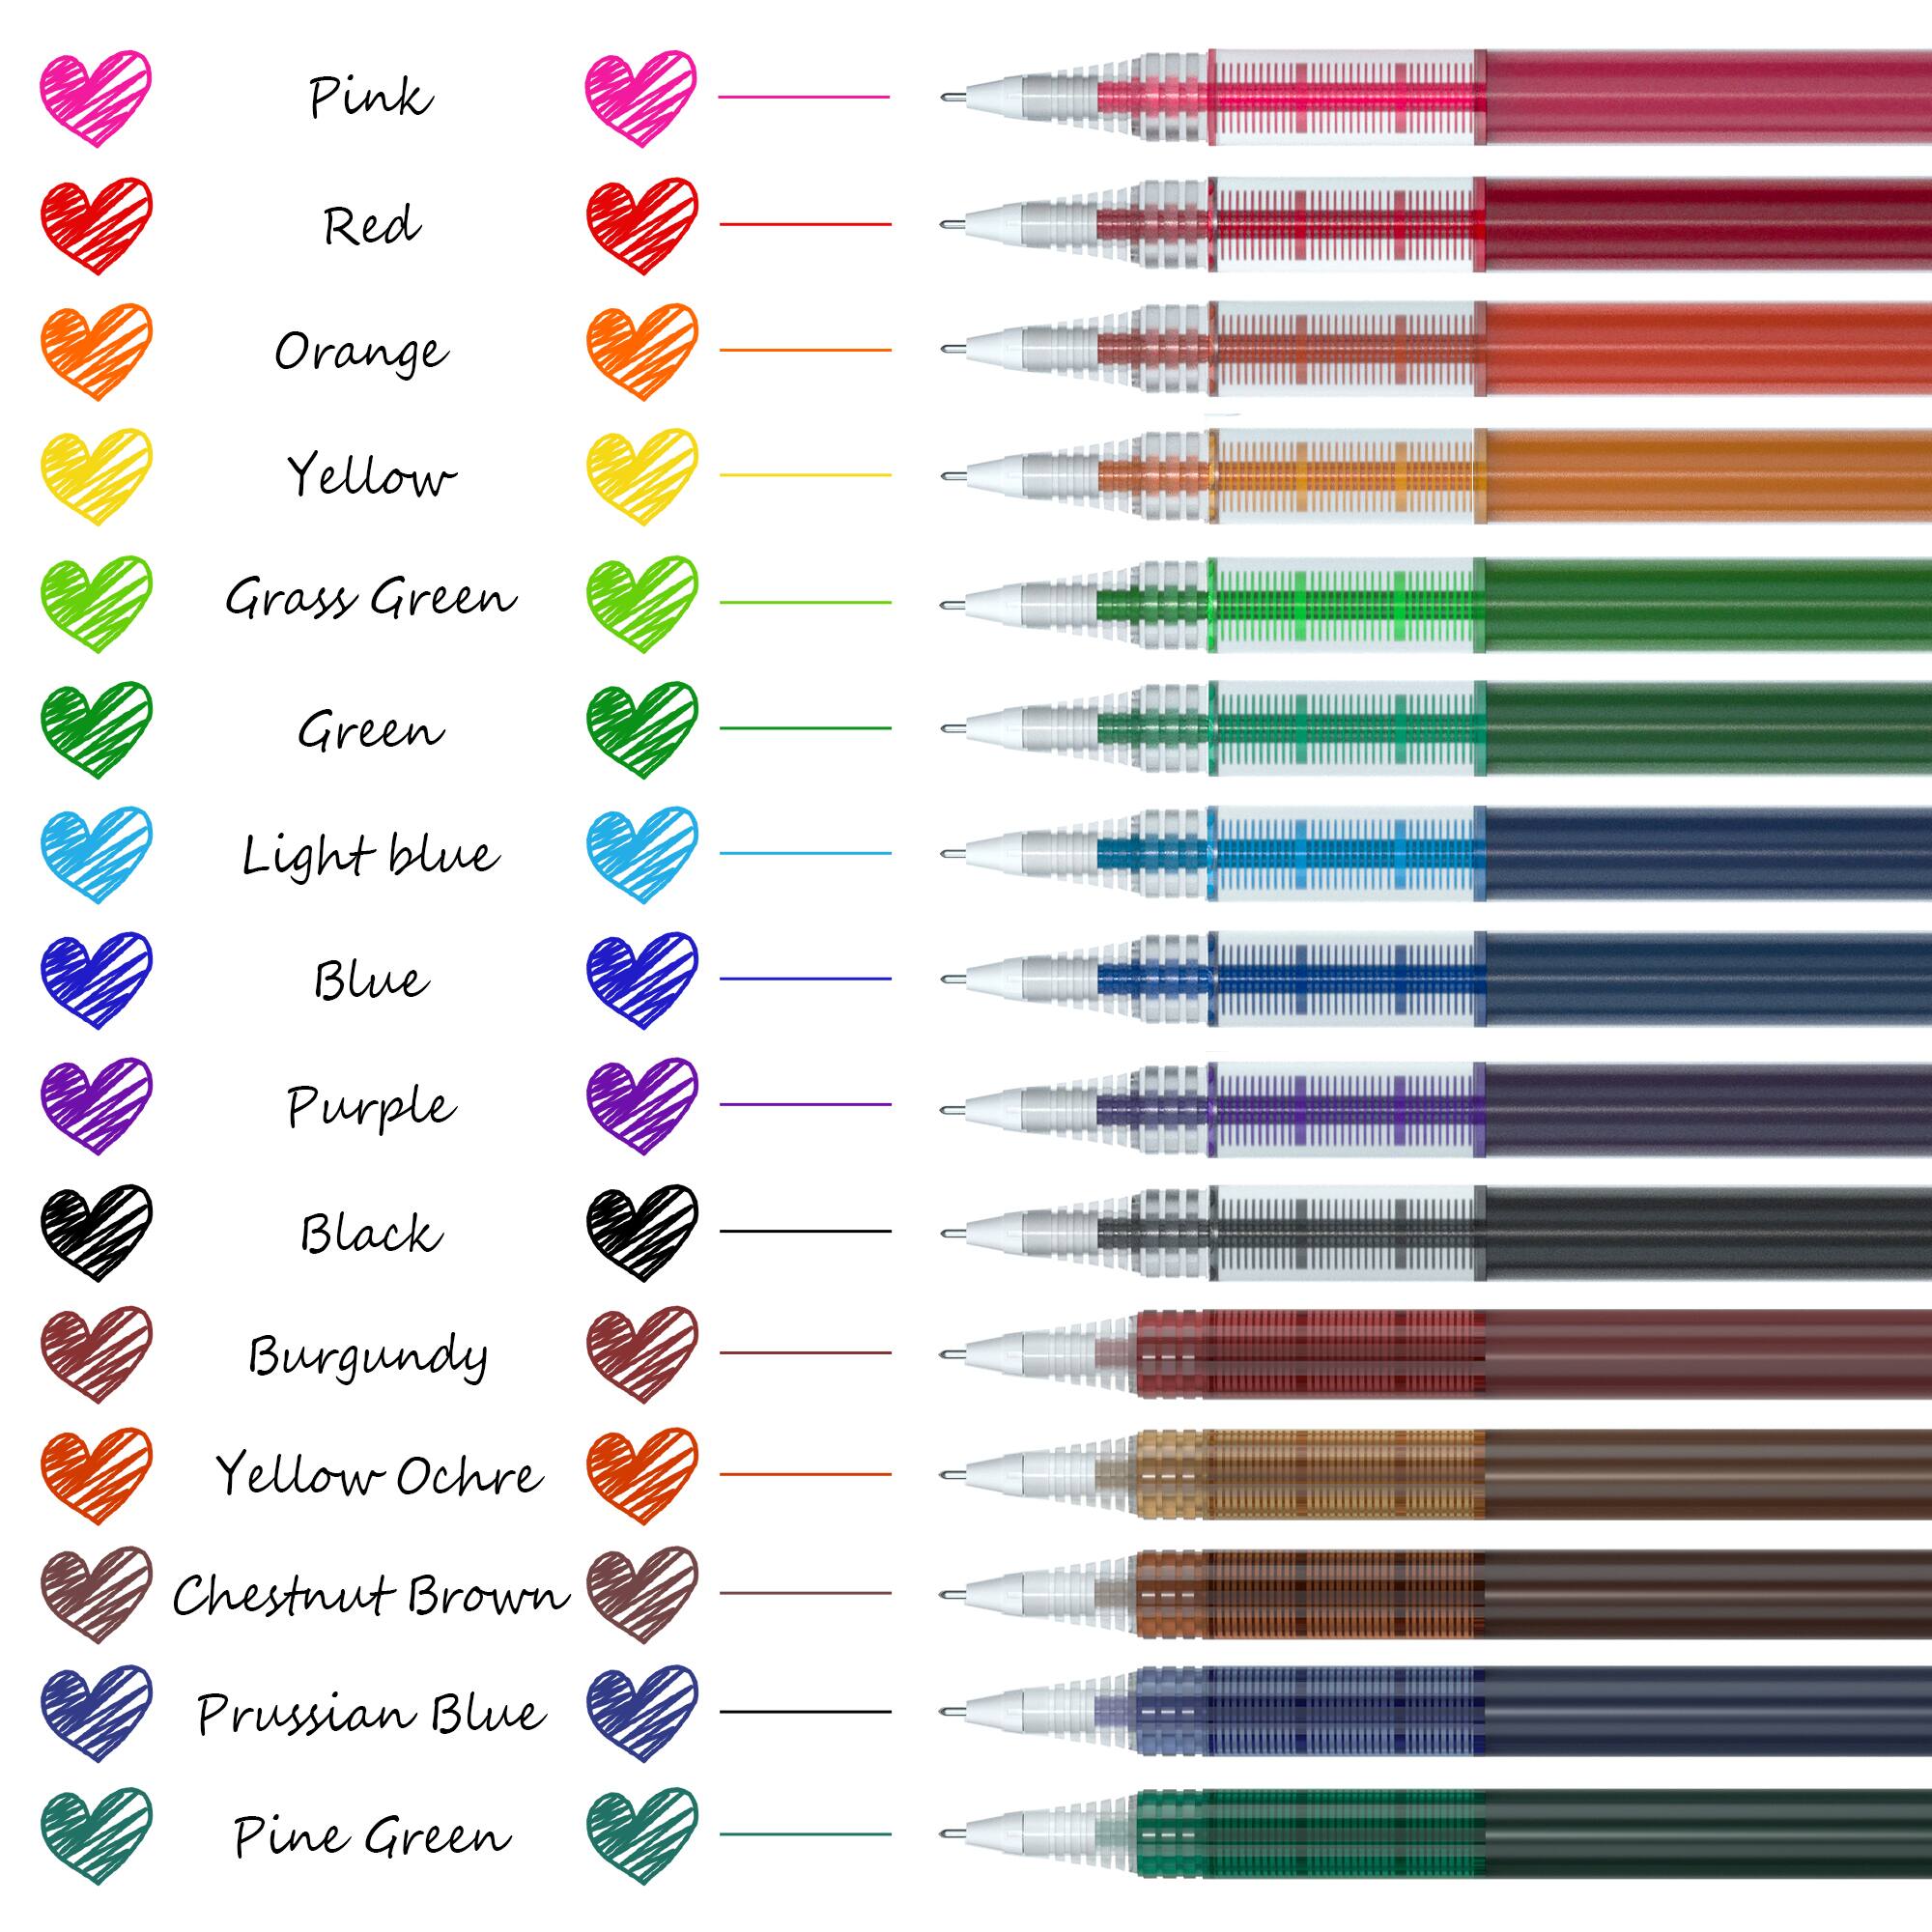 Shuttle Art 15 Colors Liquid Ink Rollerball Pens Set $6.59 + Free shipping w/ Prime or $25+